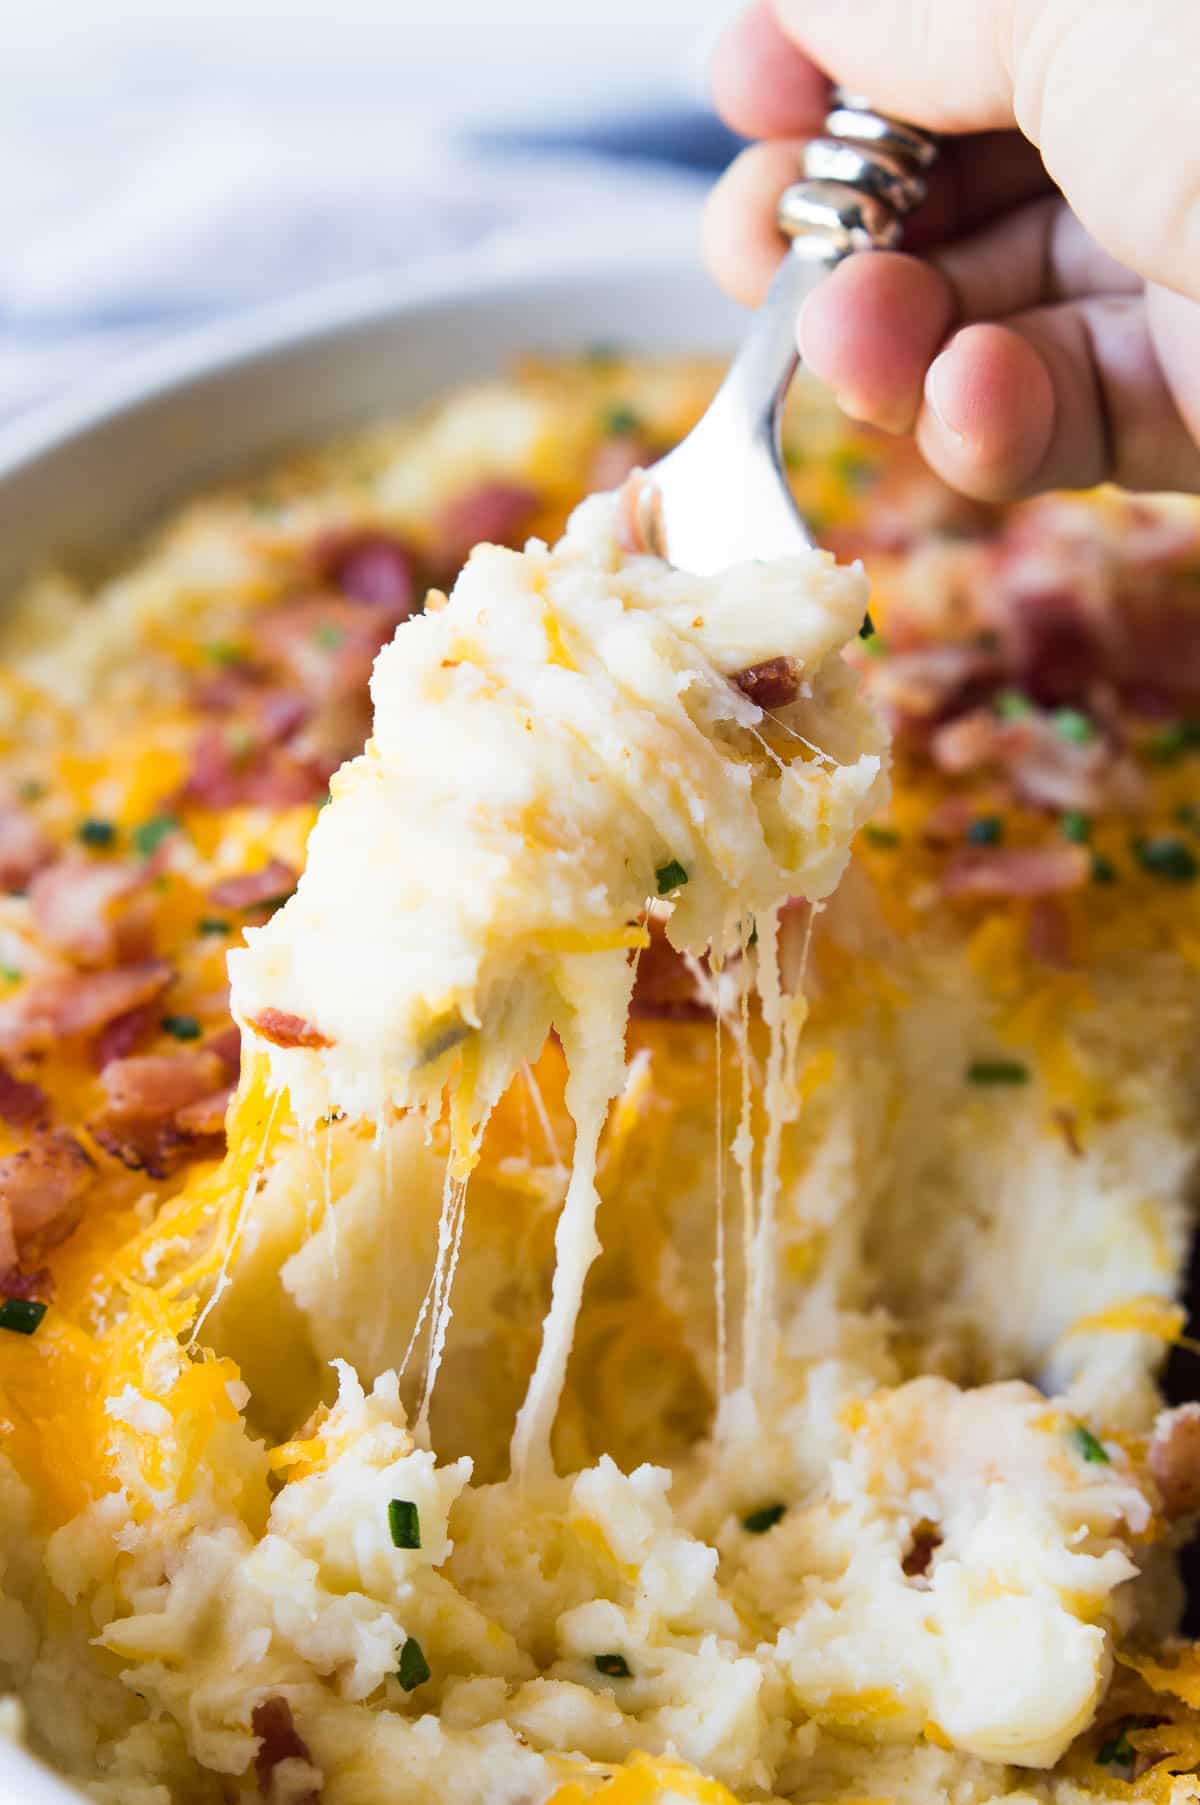 Mashed Potato Casserole. The creamiest, cheesiest mashed potatoes EVER! This easy to make side dish is loaded up with extra melty cheese, crispy bacon, and chives. The best part? You can make this dish ahead of time and then just pop it in the oven to heat back up! This dish will end up being the highlight of any meal!